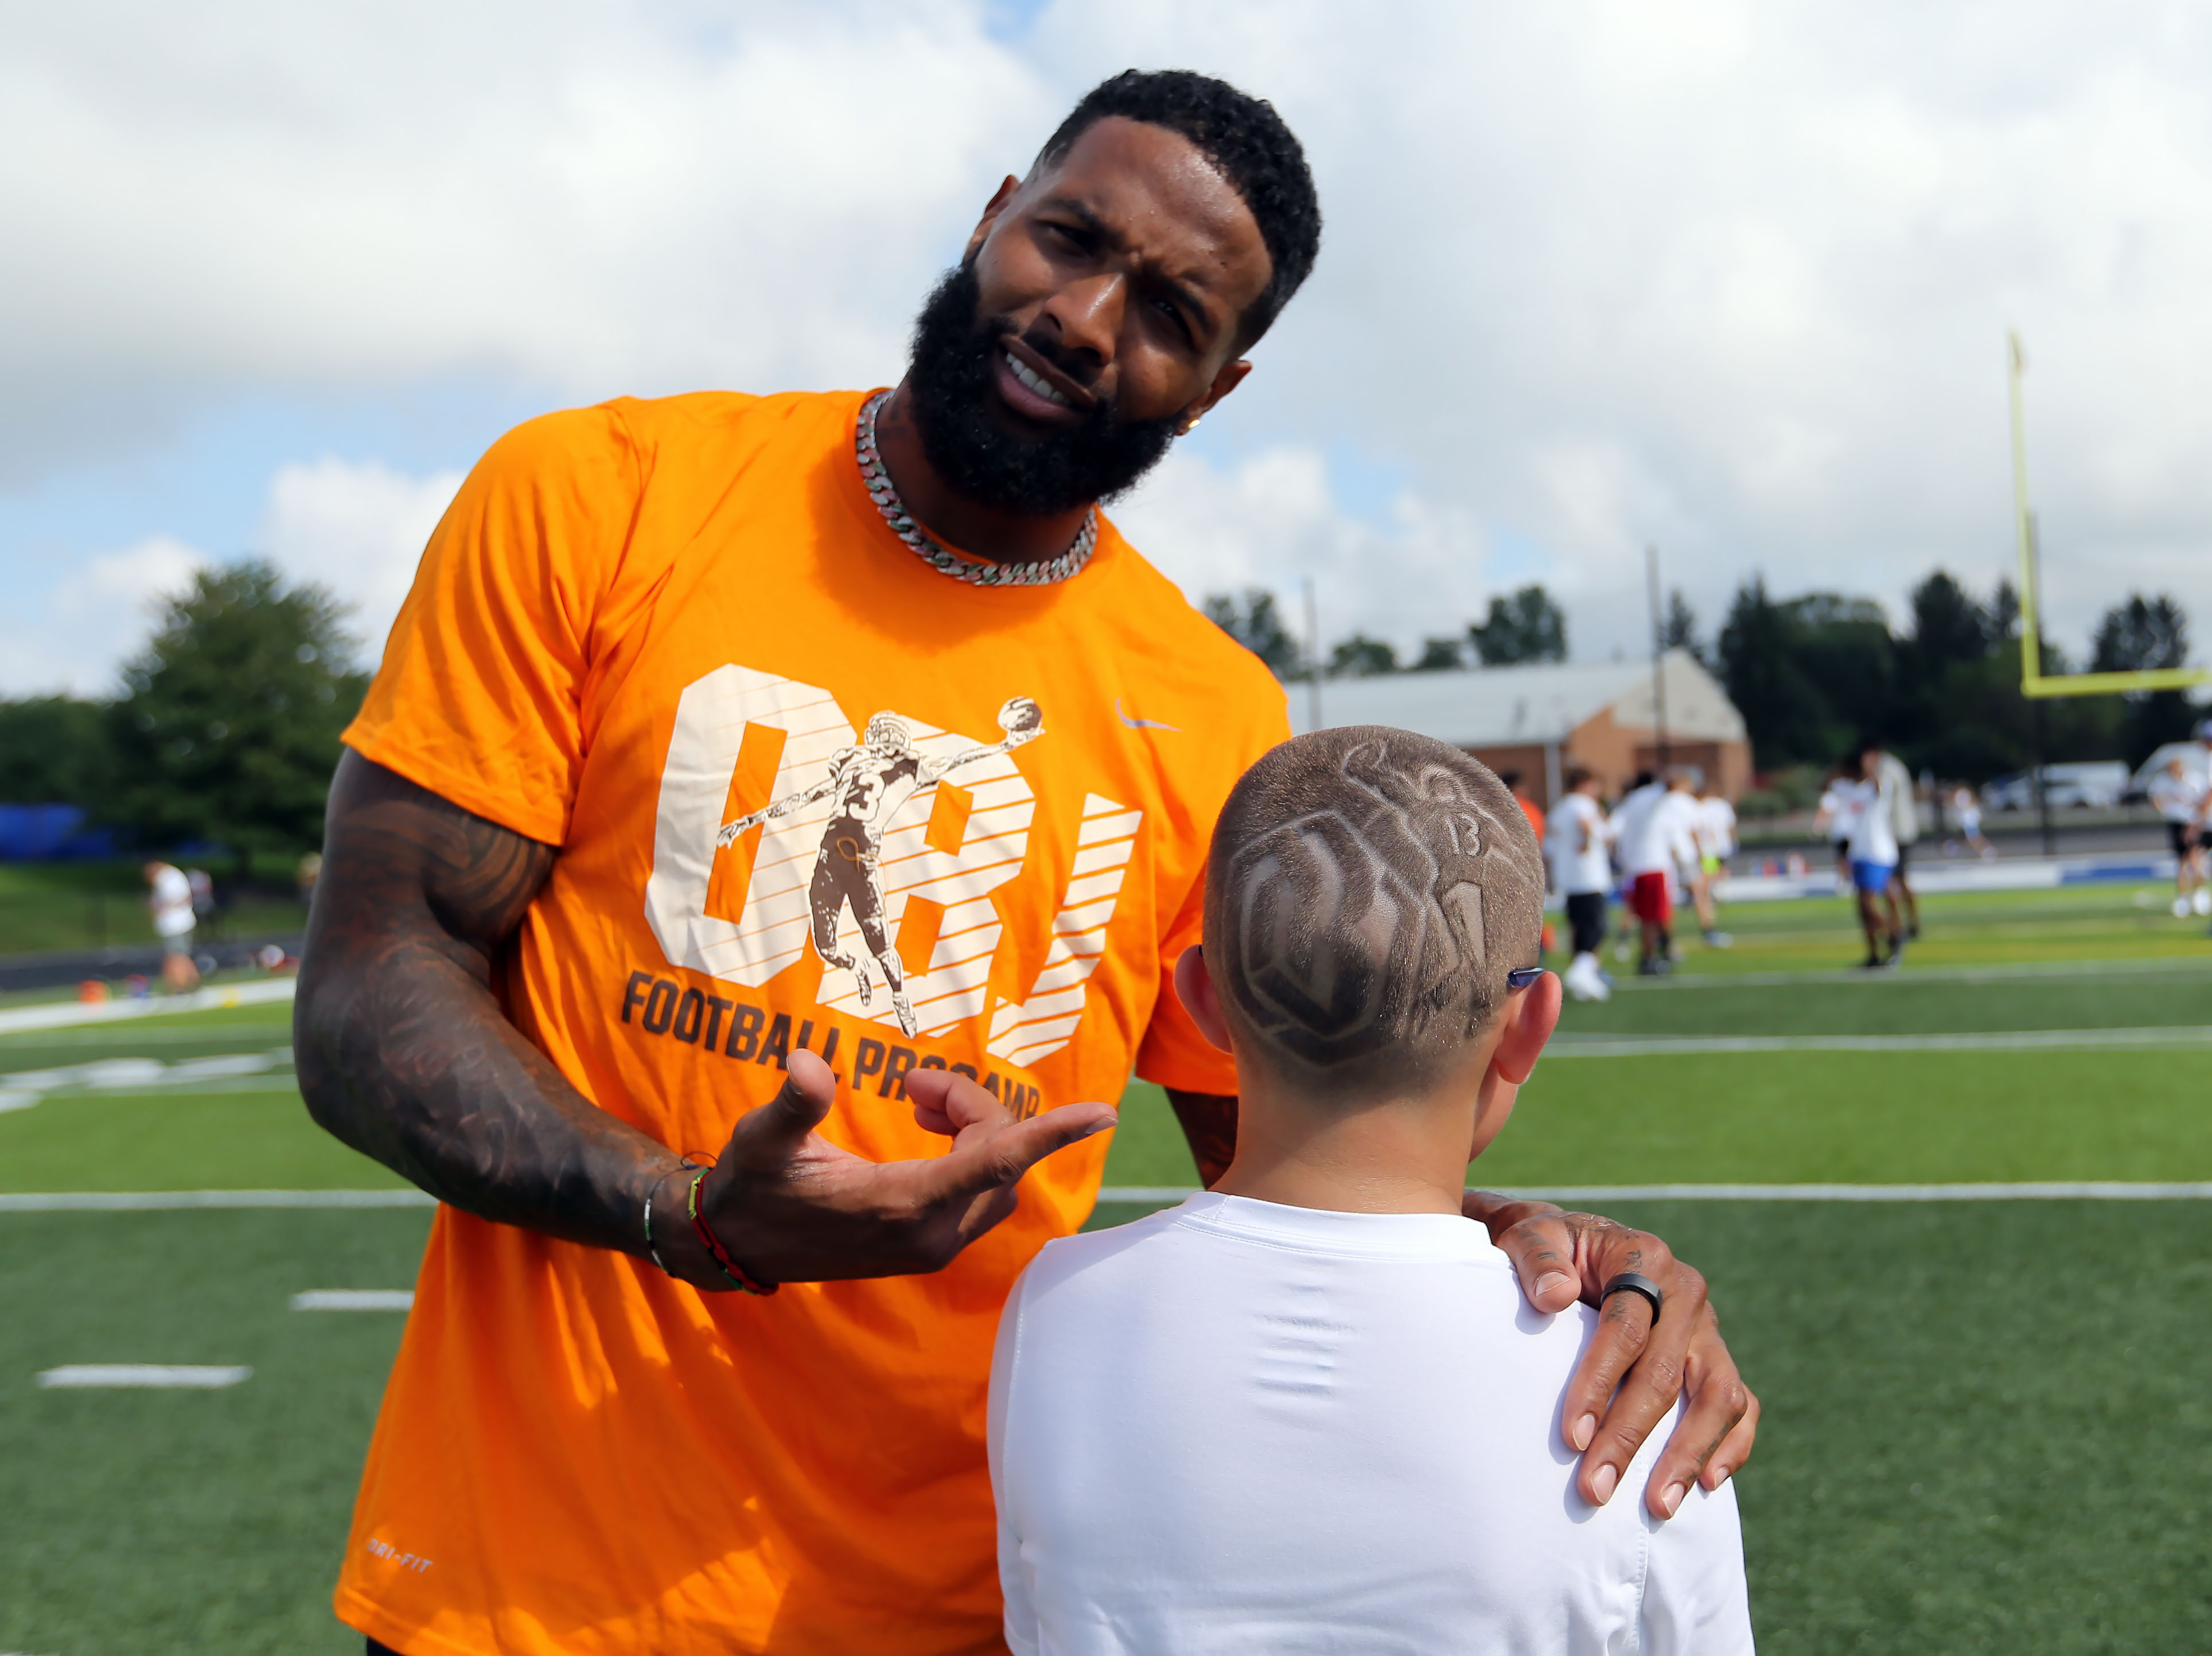 Watch Odell Beckham Jr. run drills with the kids at his youth football